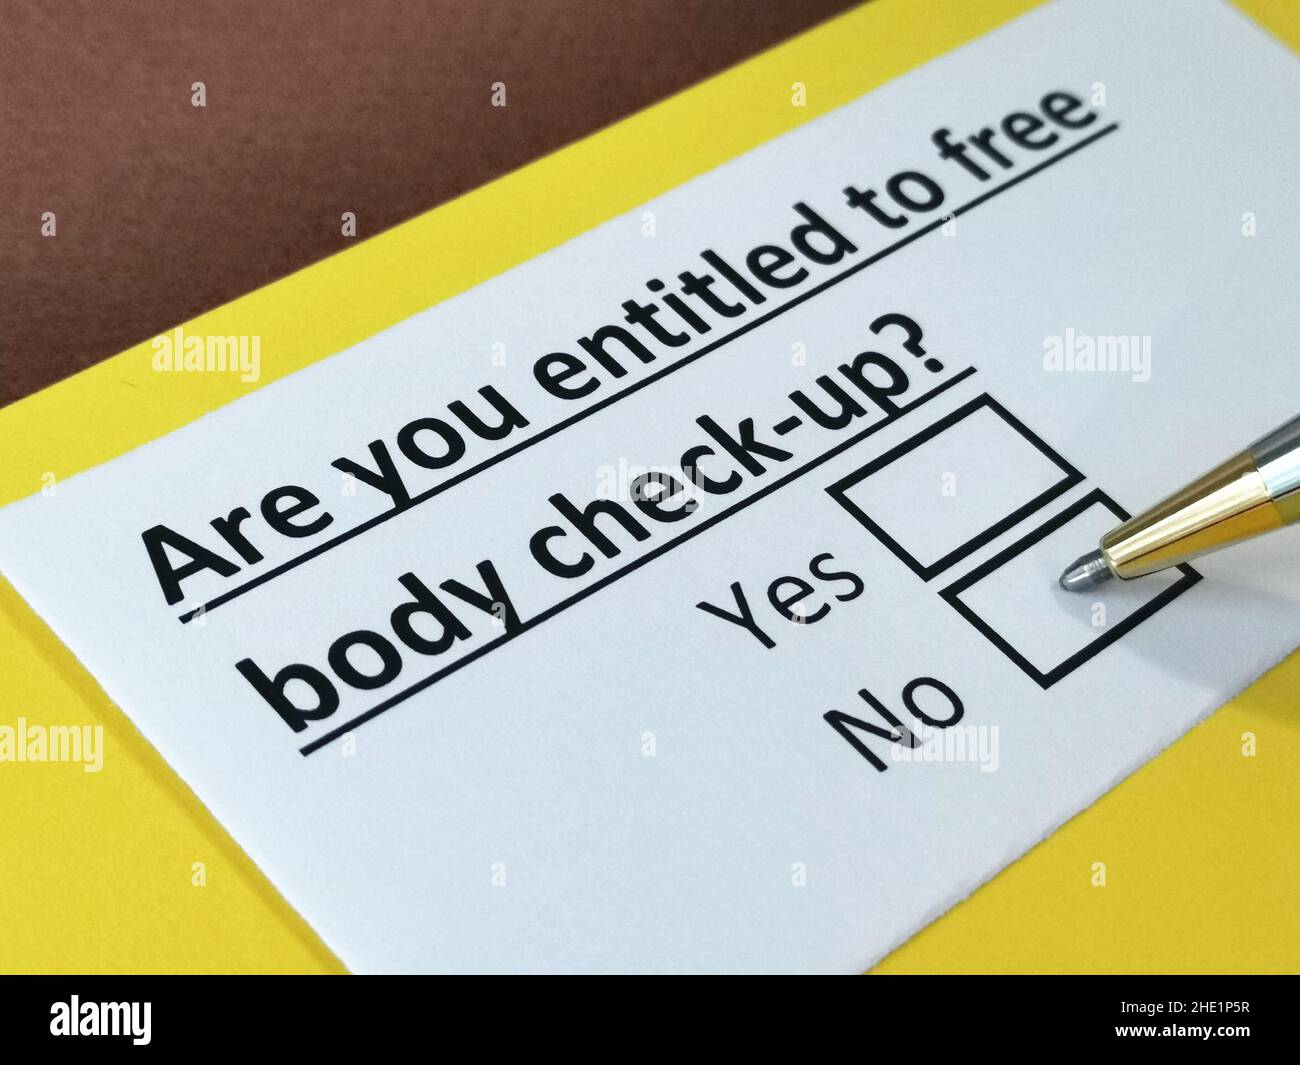 One person is answering question about free body check up. Stock Photo